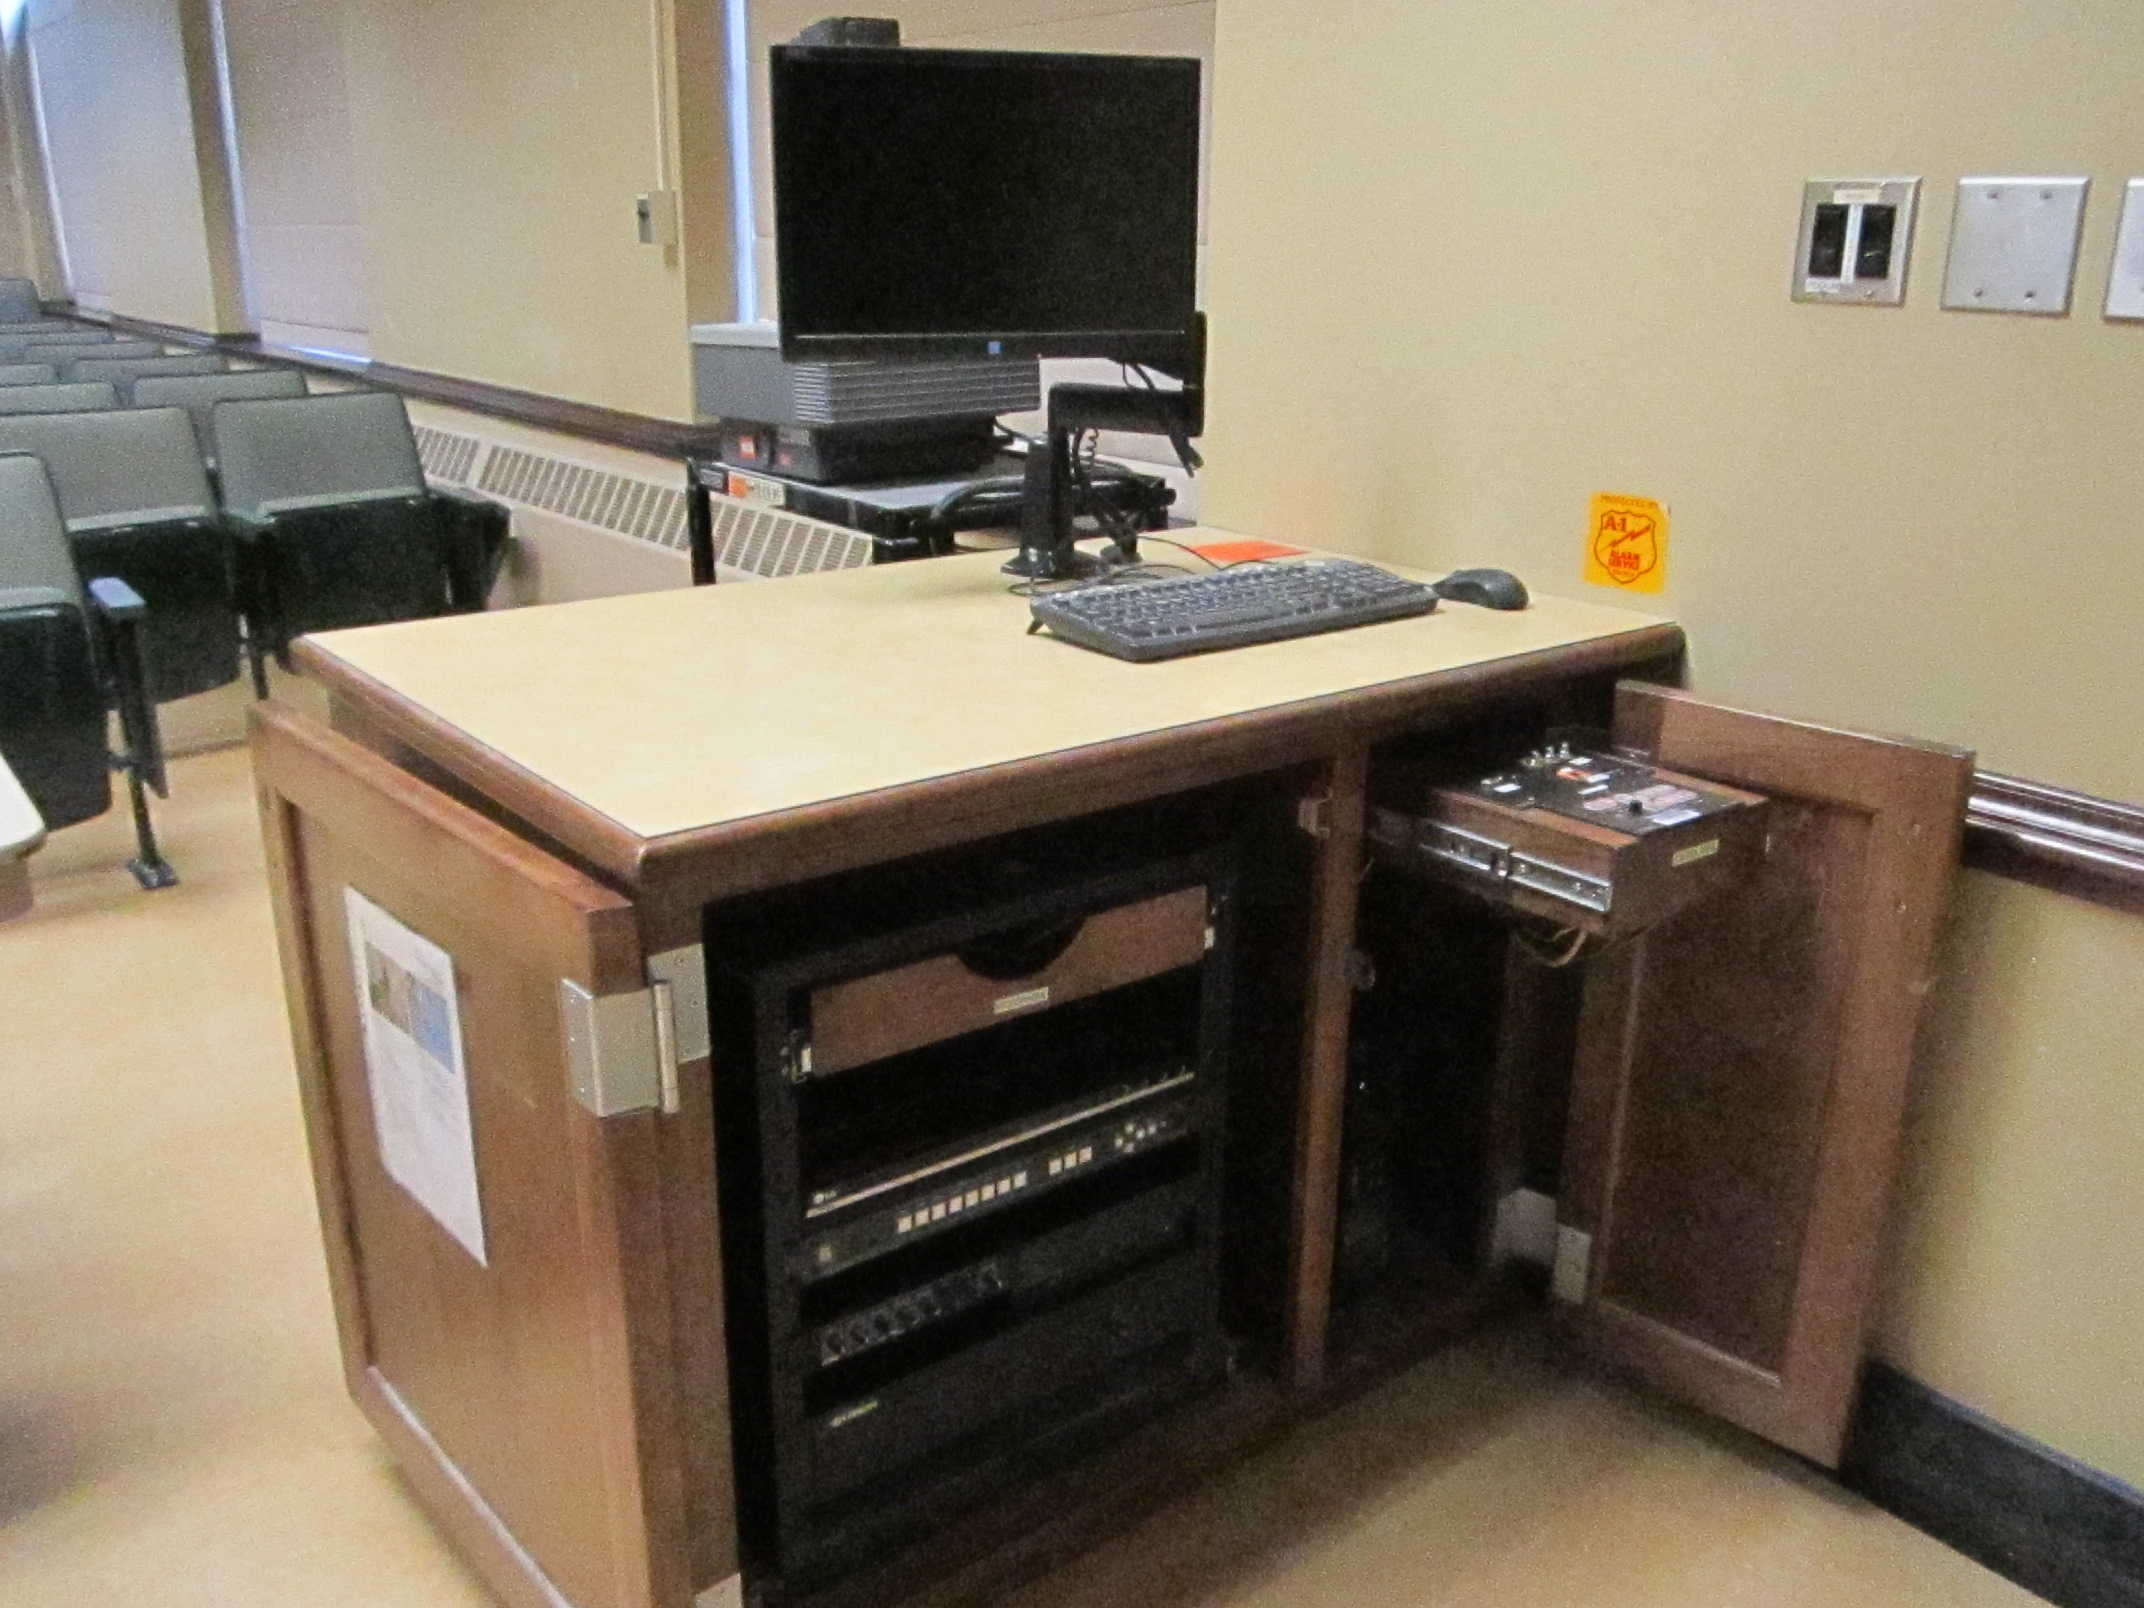 A view of the open cabinet with a computer monitor, HDMI inputs, a push button controller, and audio visual rack